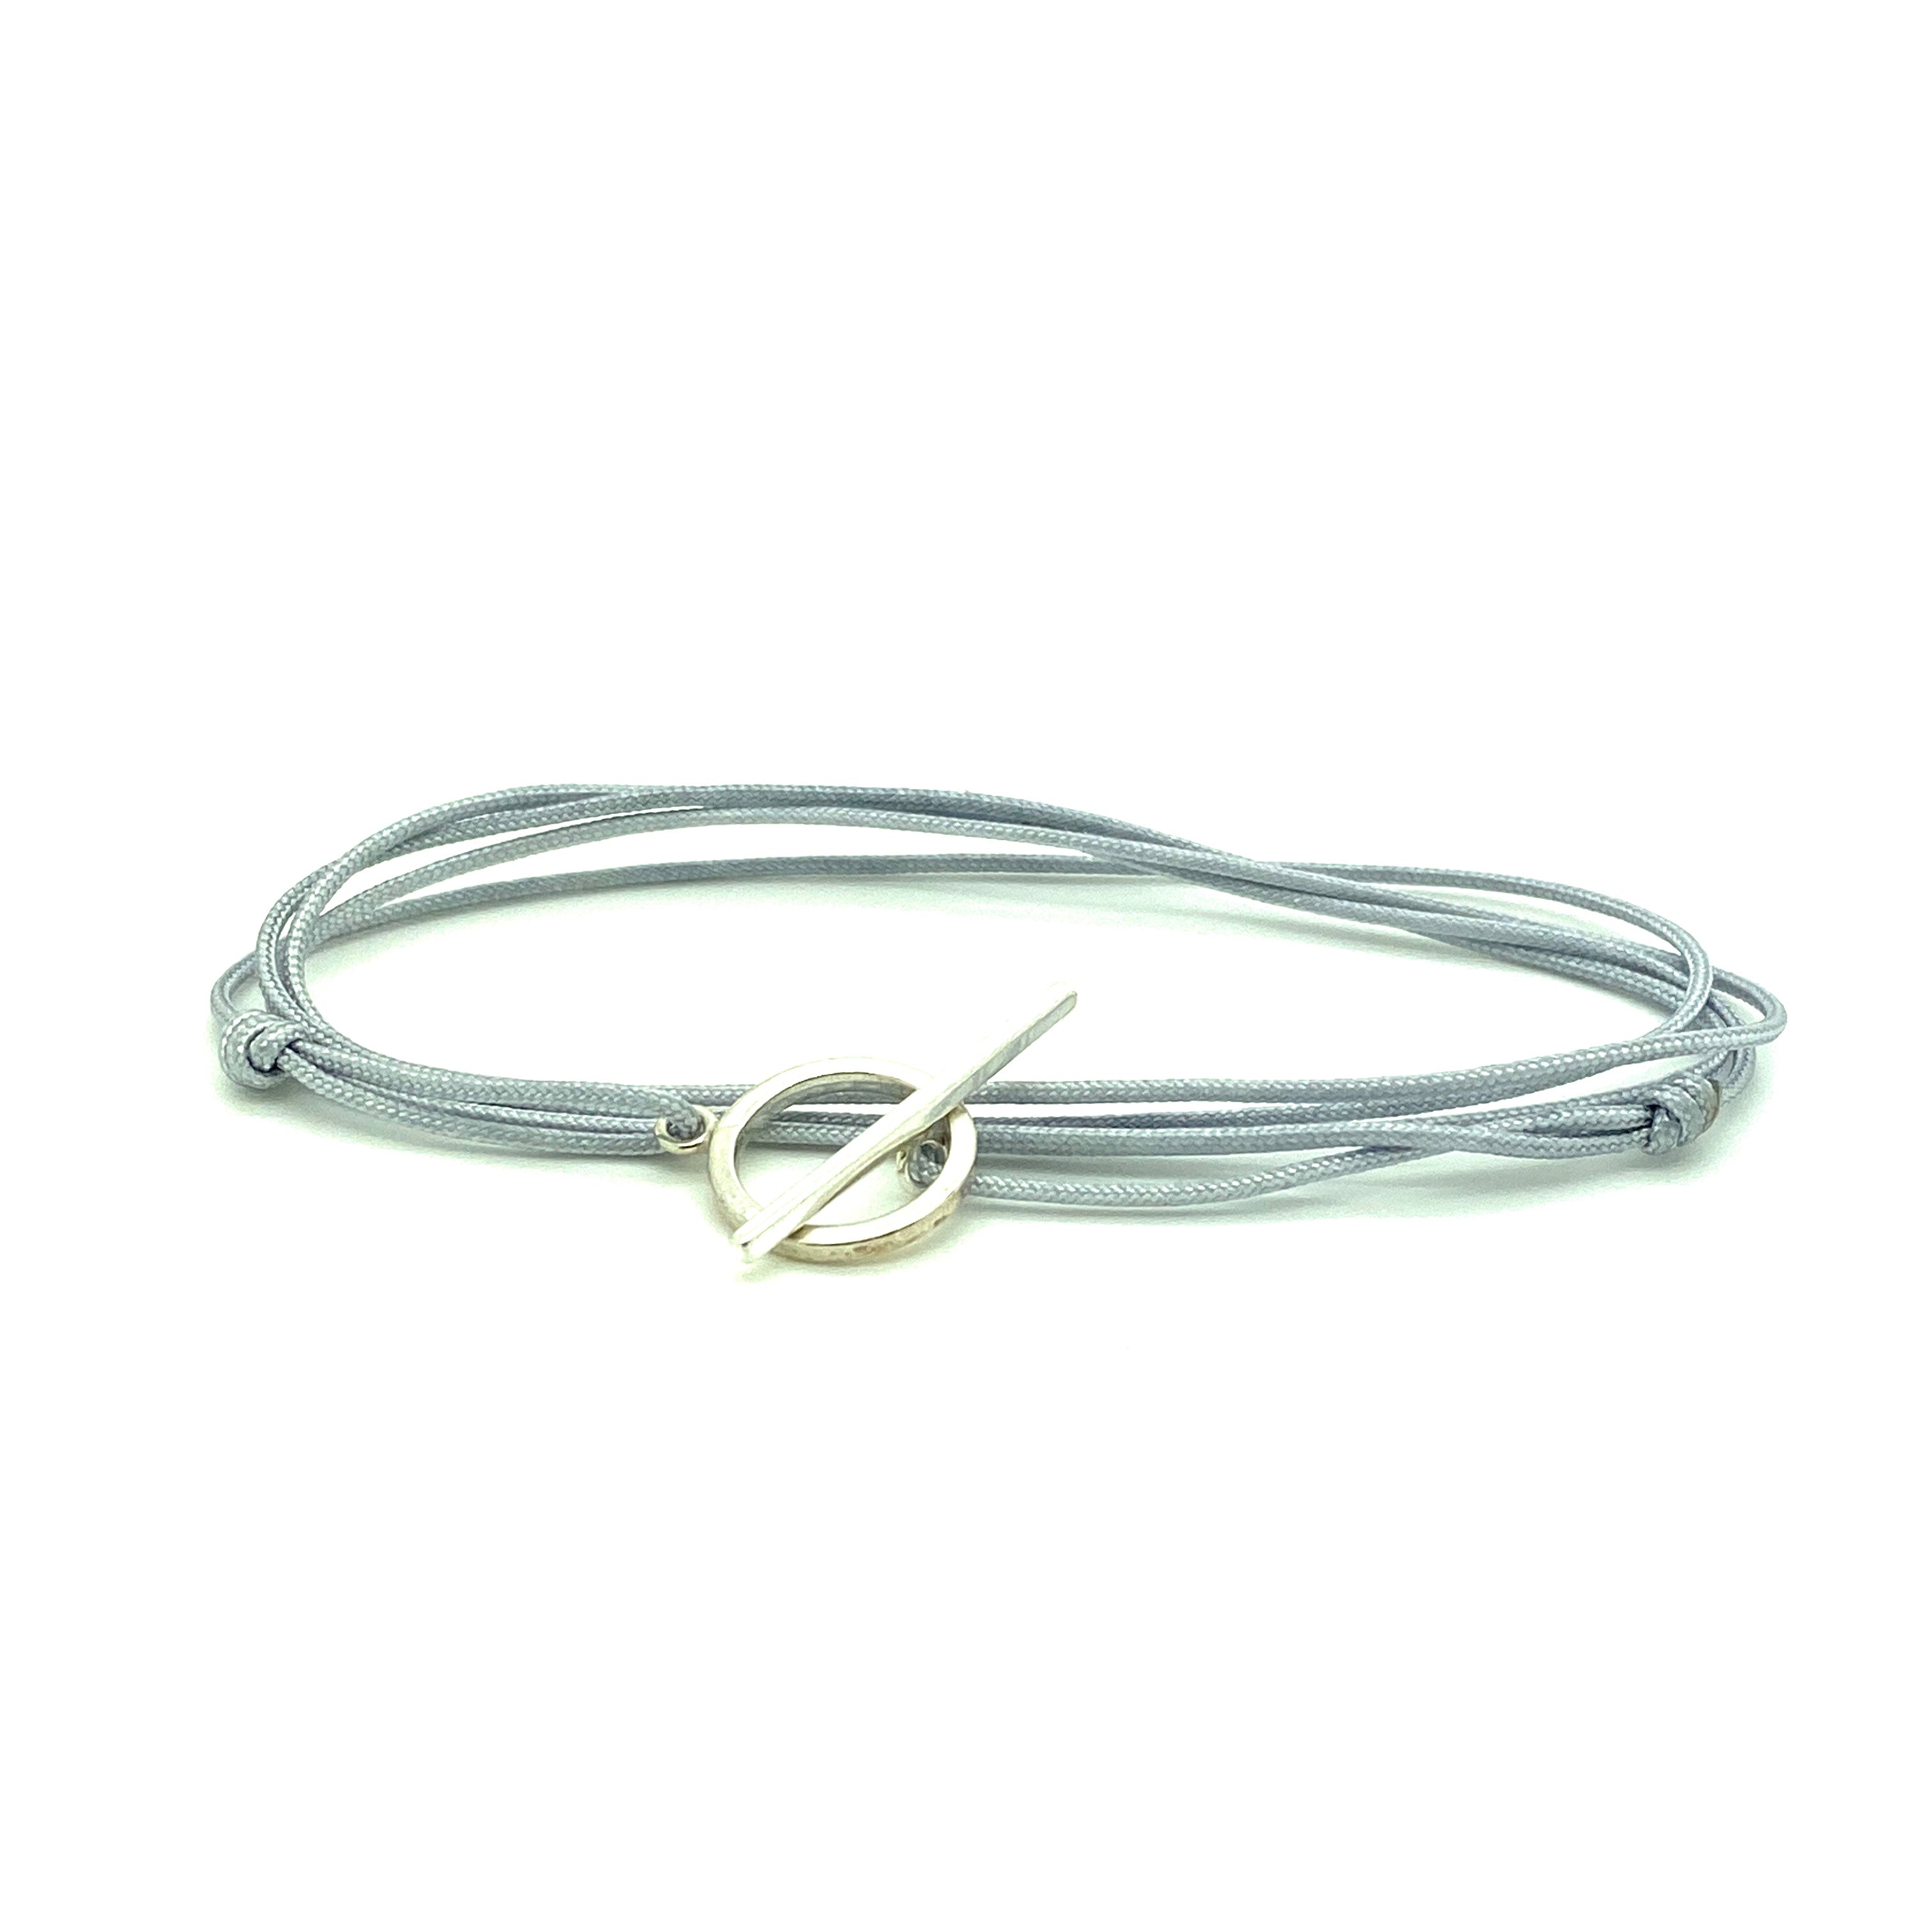 Knotted cord for adjustable, easy fit. Sterling silver clasp. Rope braelet. WristBend